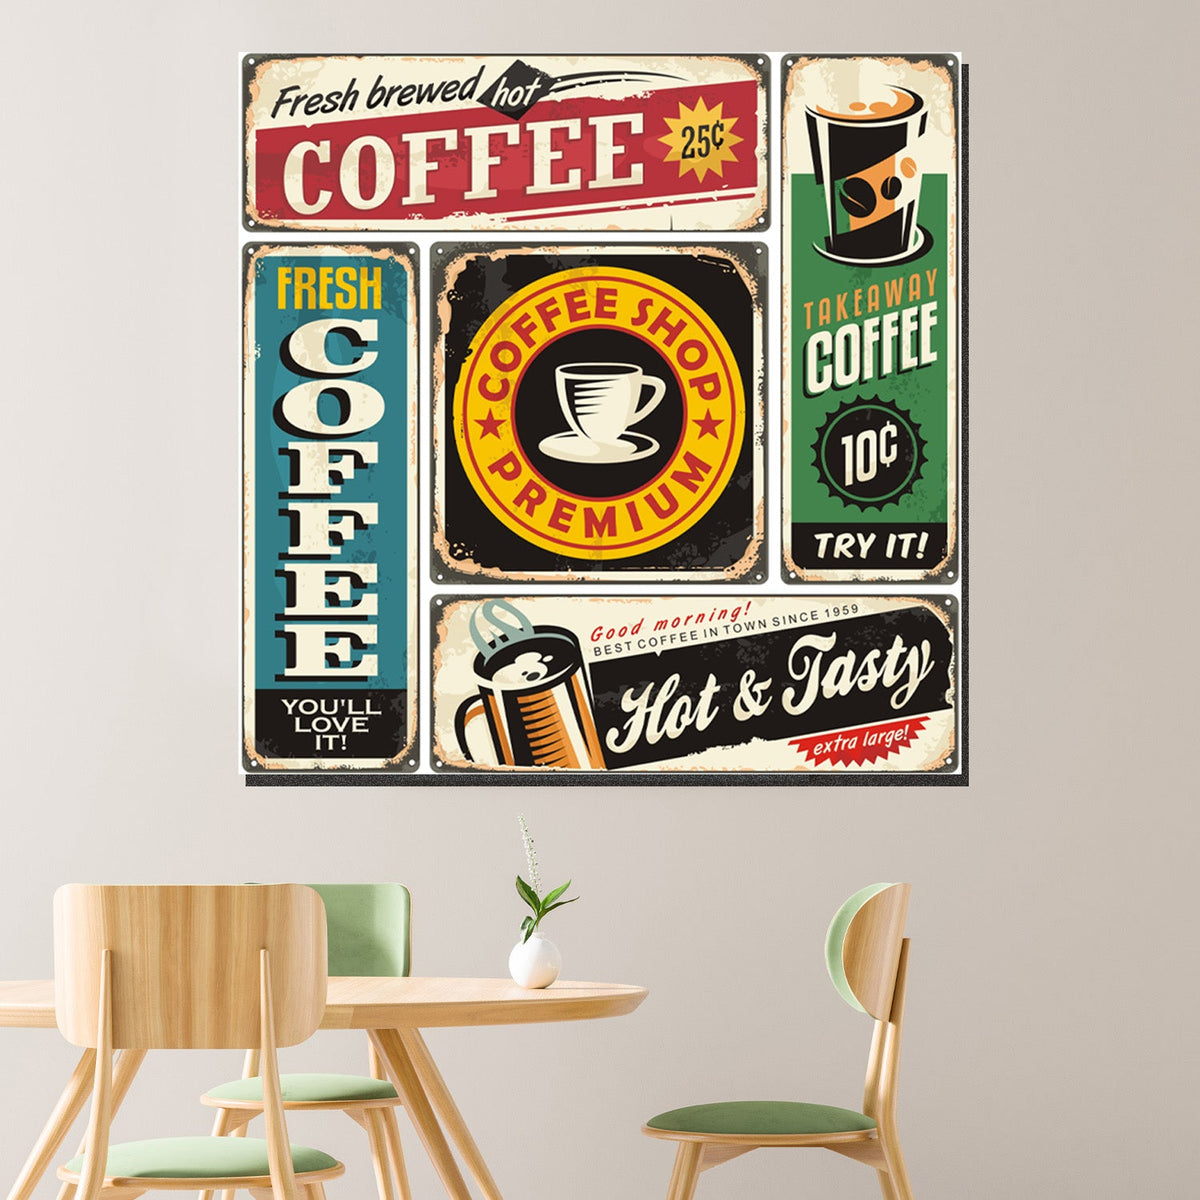 https://cdn.shopify.com/s/files/1/0387/9986/8044/products/MetalCoffeeSignCanvasArtprintStretched-4.jpg